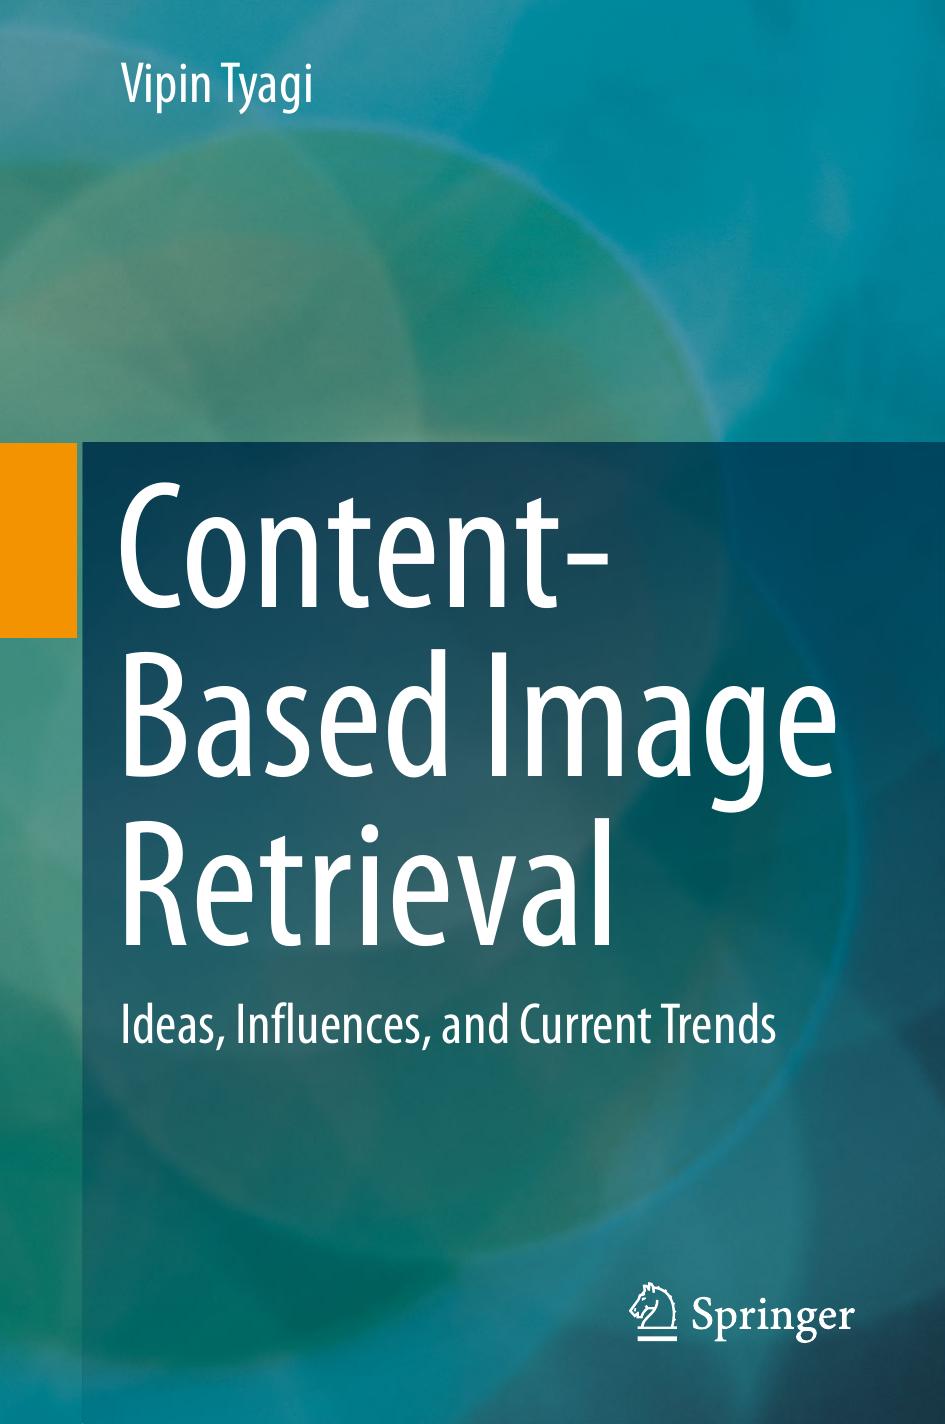 Content-Based Image Retrieval: Ideas, Influences, and Current Trends